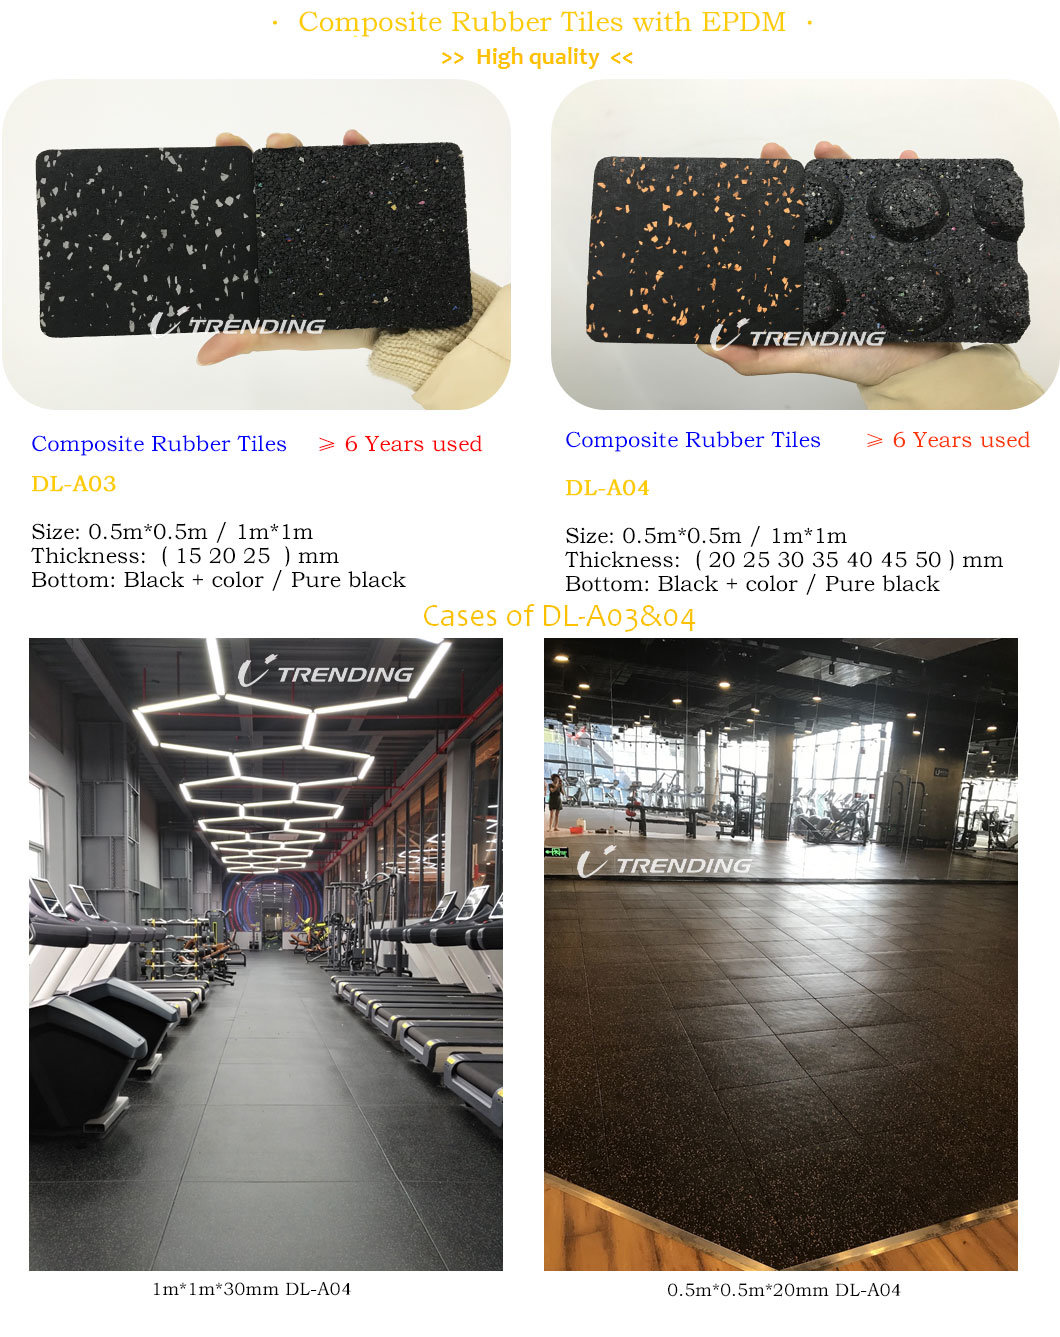 EPDM Fire Prevention Rubber Floor with Low Cost Roll Tiles Interlocking Types